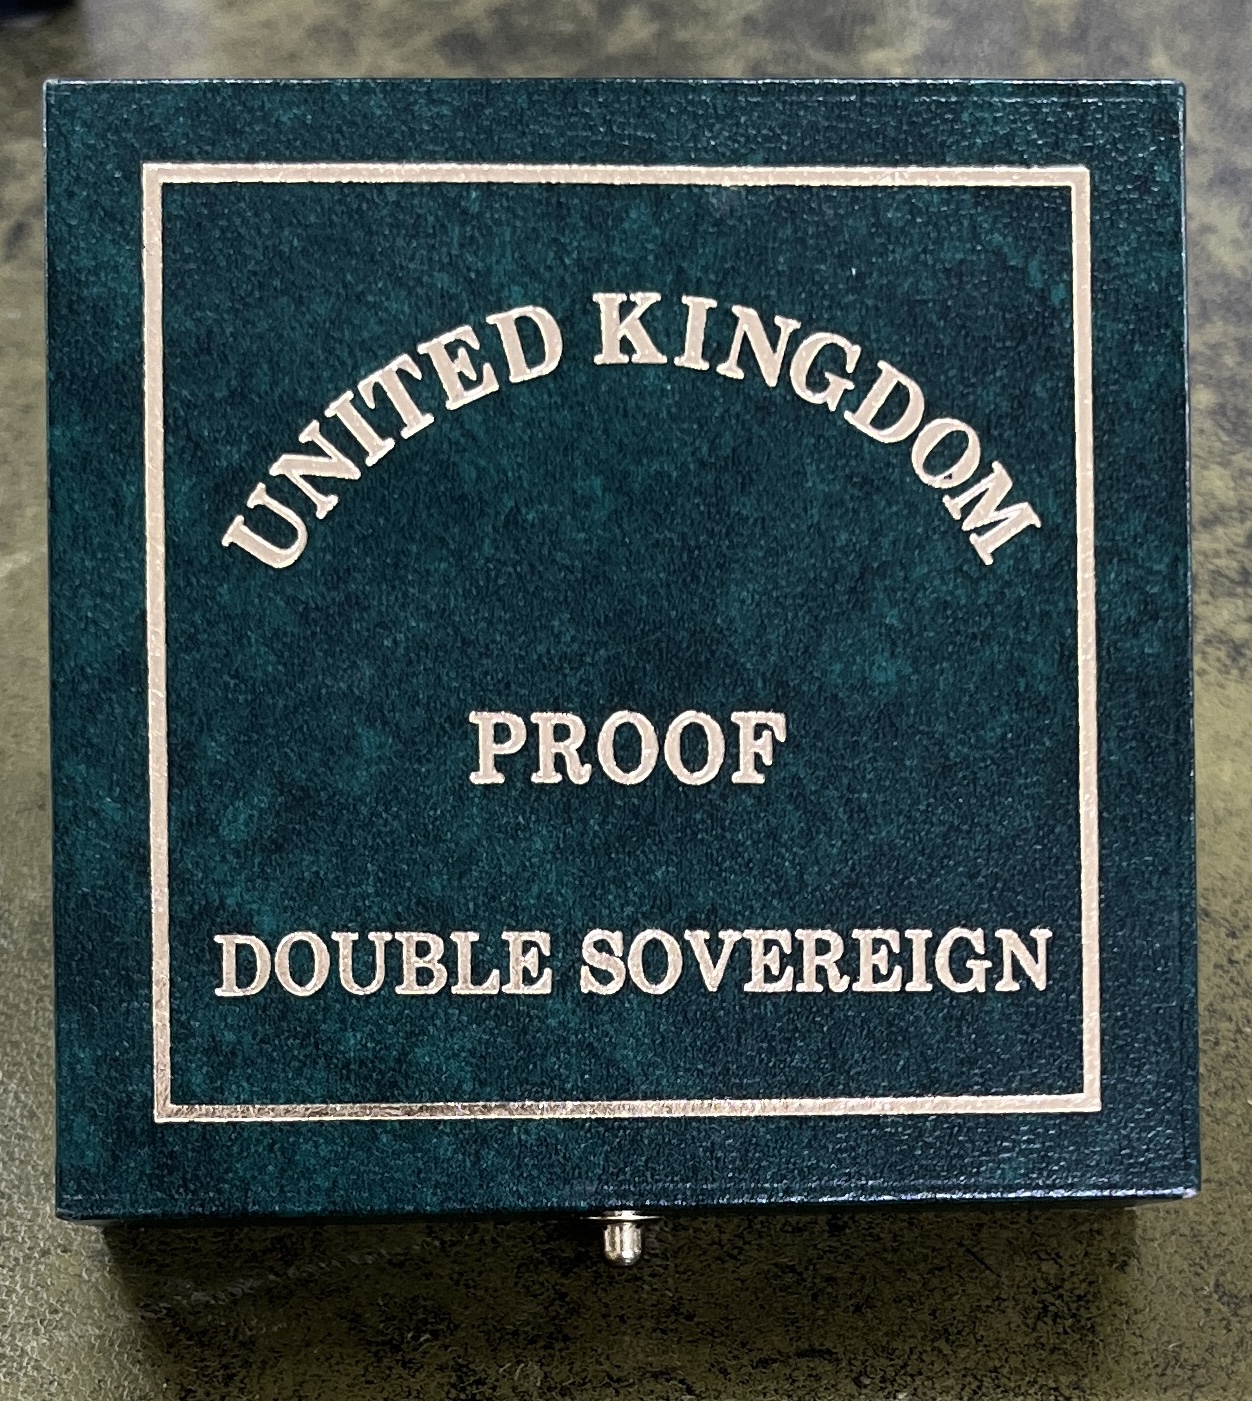 Royal Mint, a UK proof QEII double sovereign dated 1993 with certificate number 117, 15.98g, in - Image 2 of 4